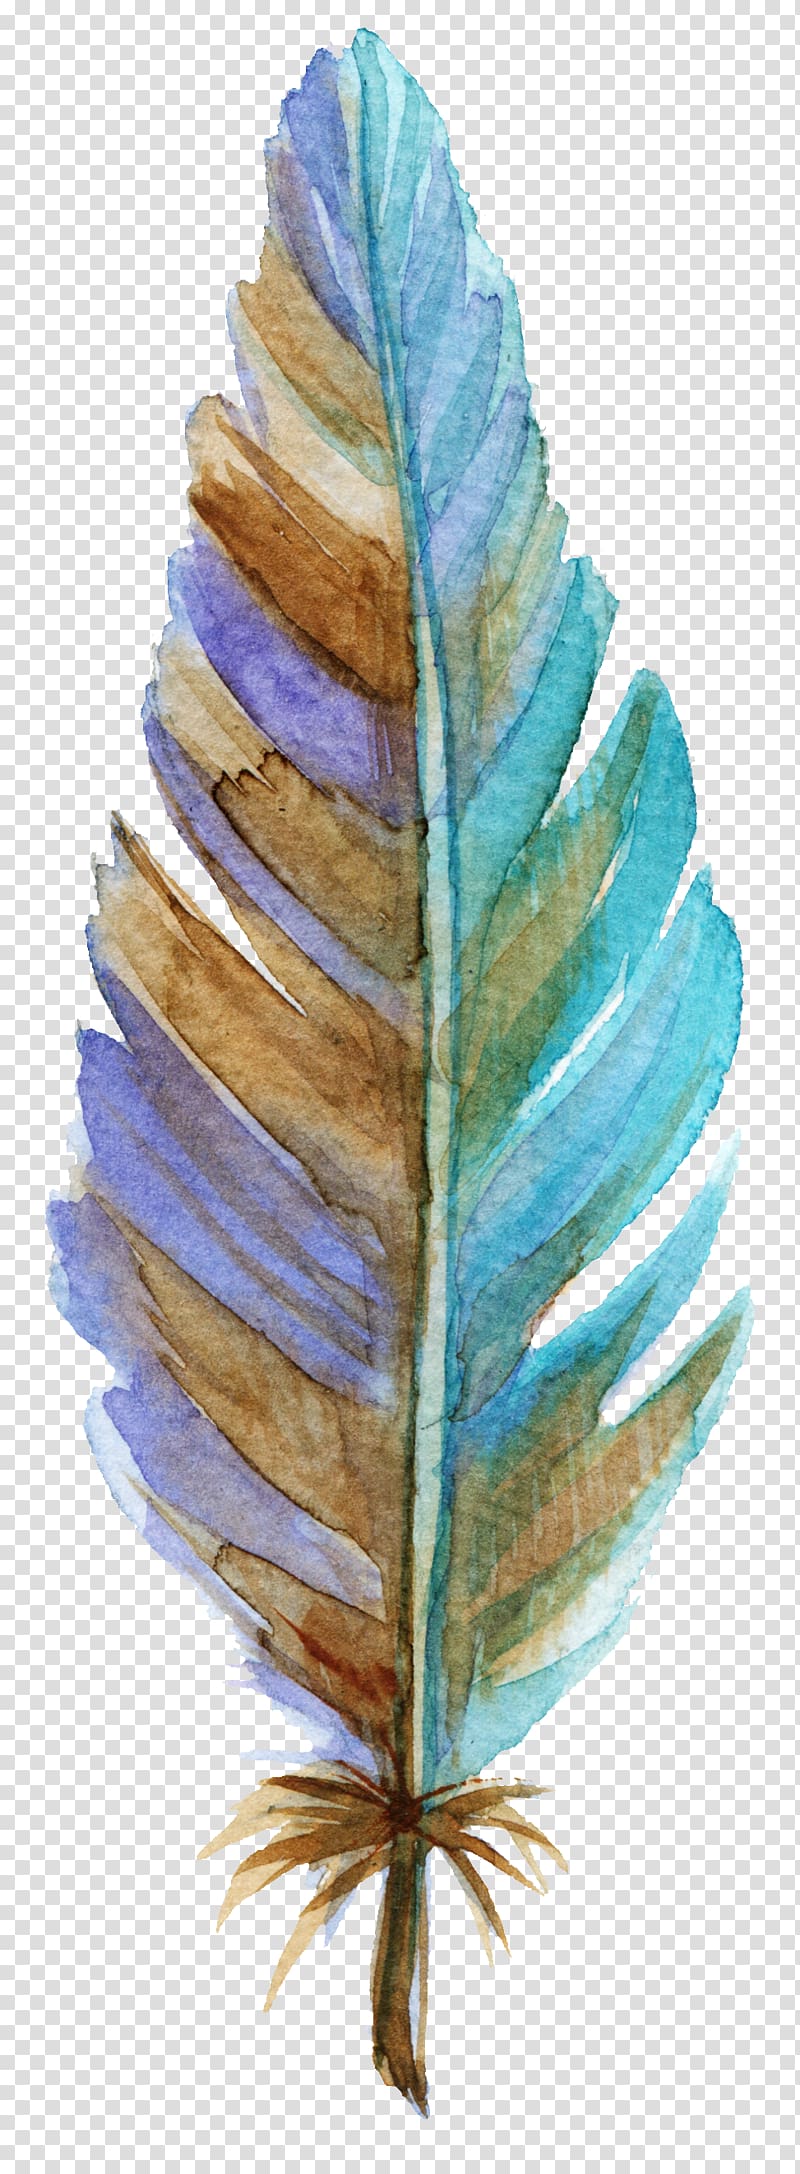 teal, brown, and gray feather, Leaf Feather Texture mapping, Blue Feather leaves transparent background PNG clipart